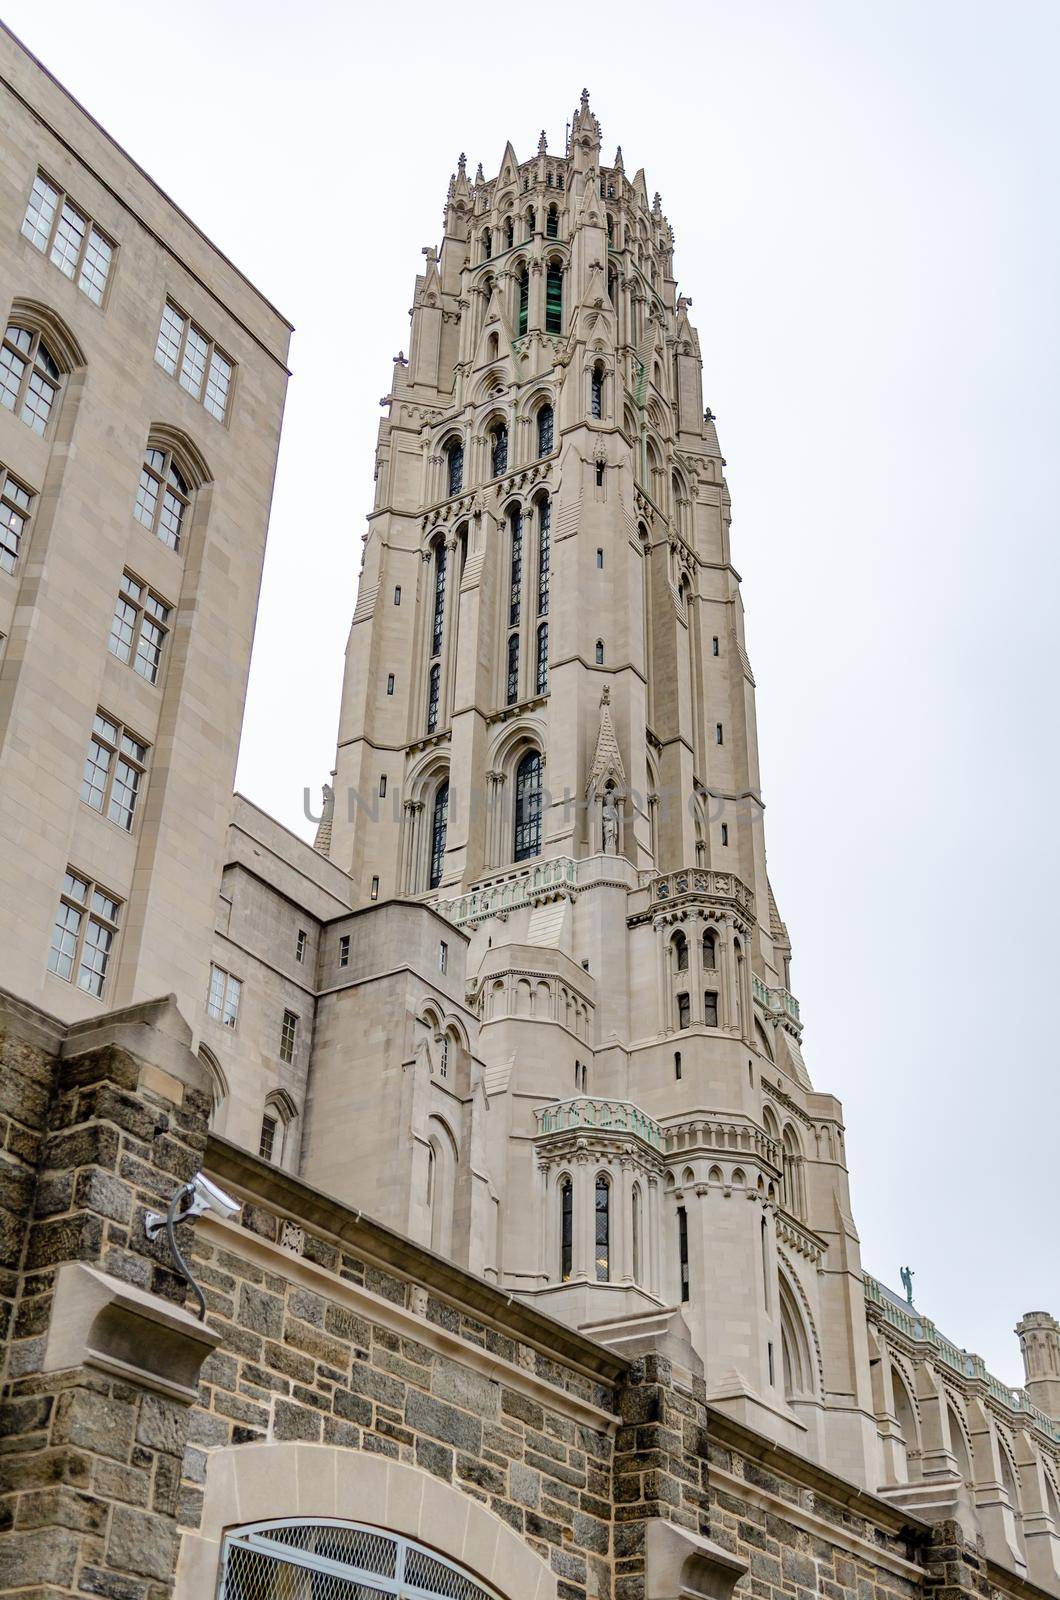 Riverside Church Tower view from low angle, Harlem, New York City, during winter day with overcast, vertical